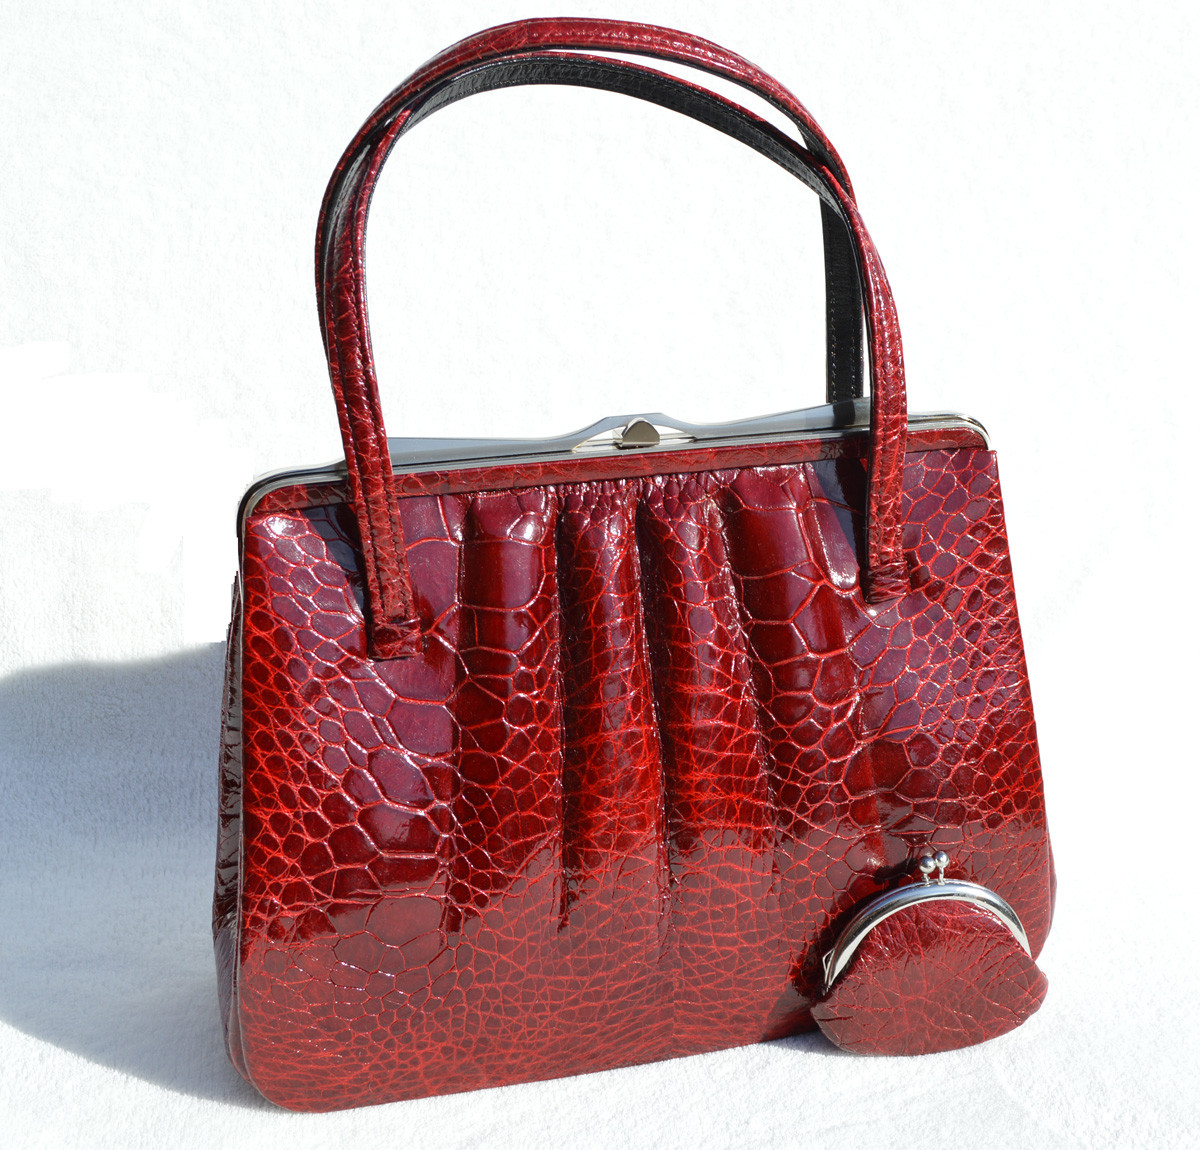 China Dismayed Over Hermès Bags Made from Exotic Skins